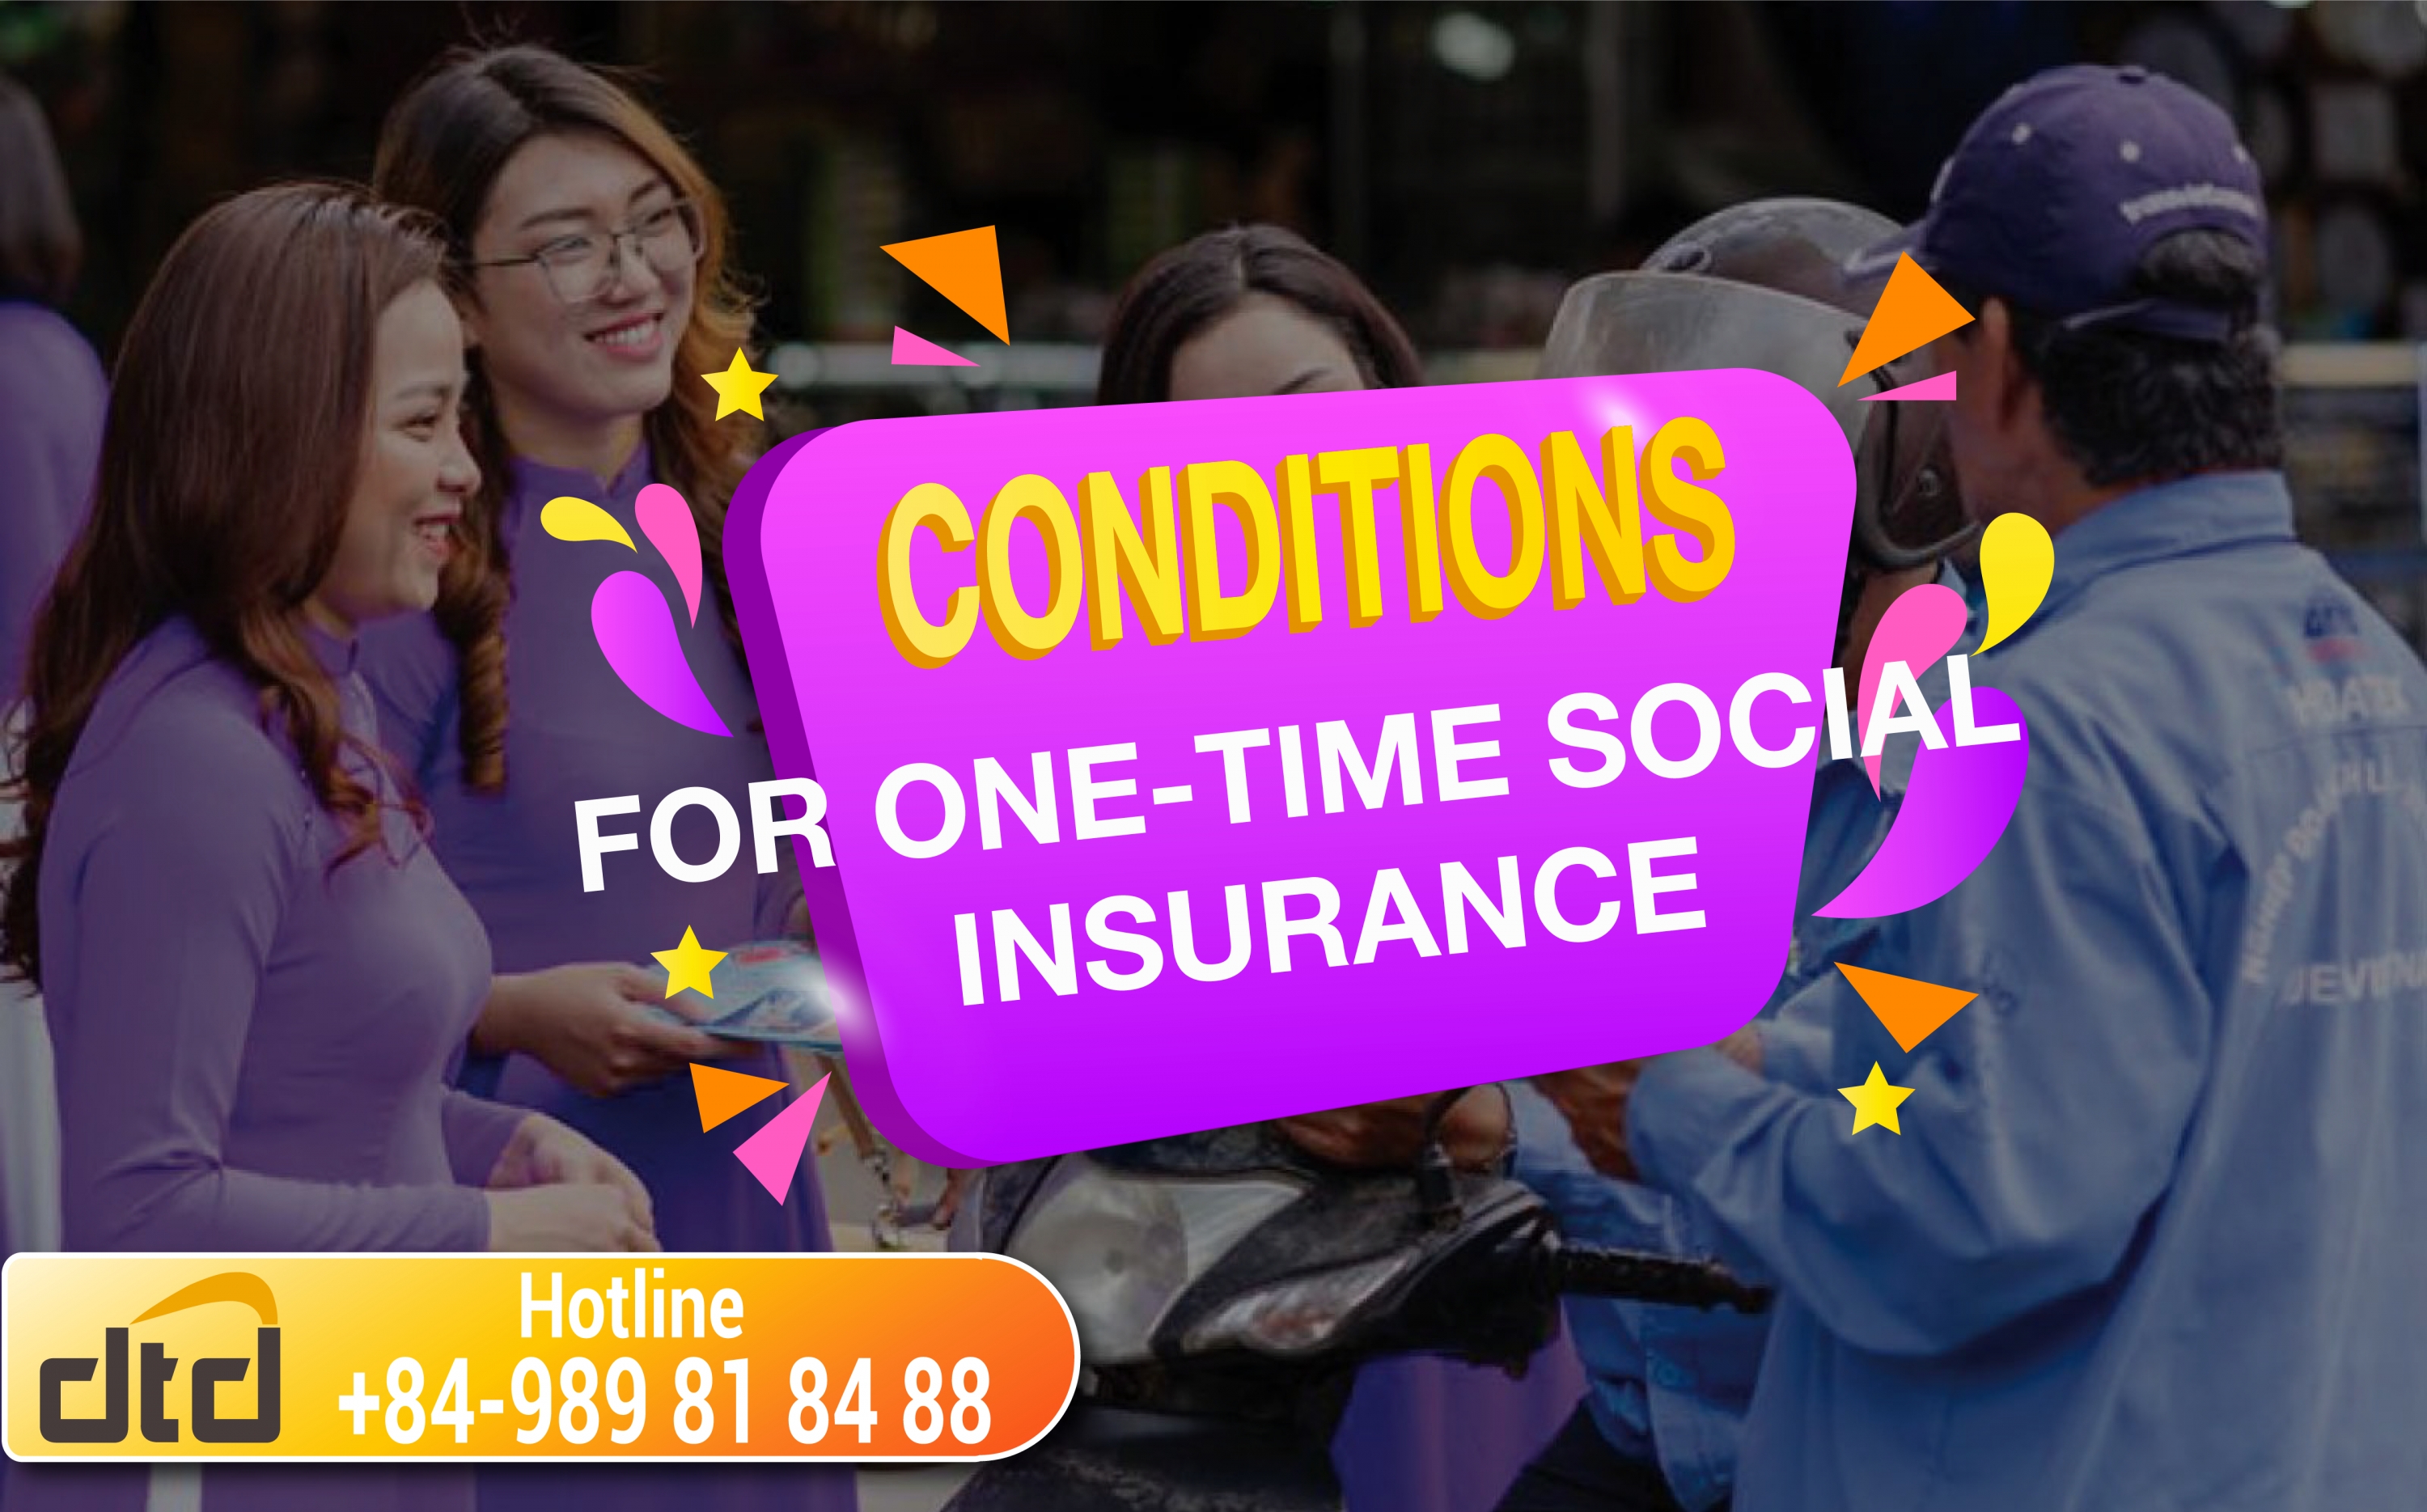 Conditions for one-time social insurance